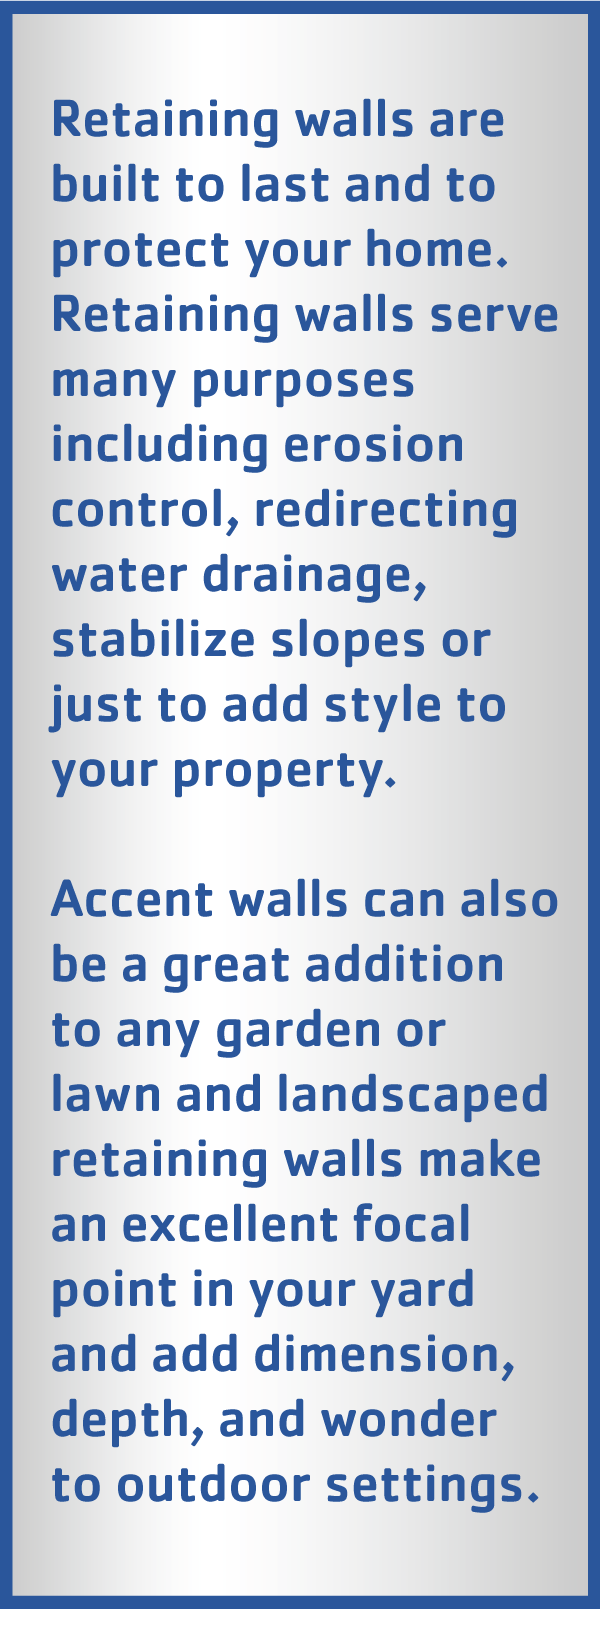 Retaining Walls_Text.png?1419364566741